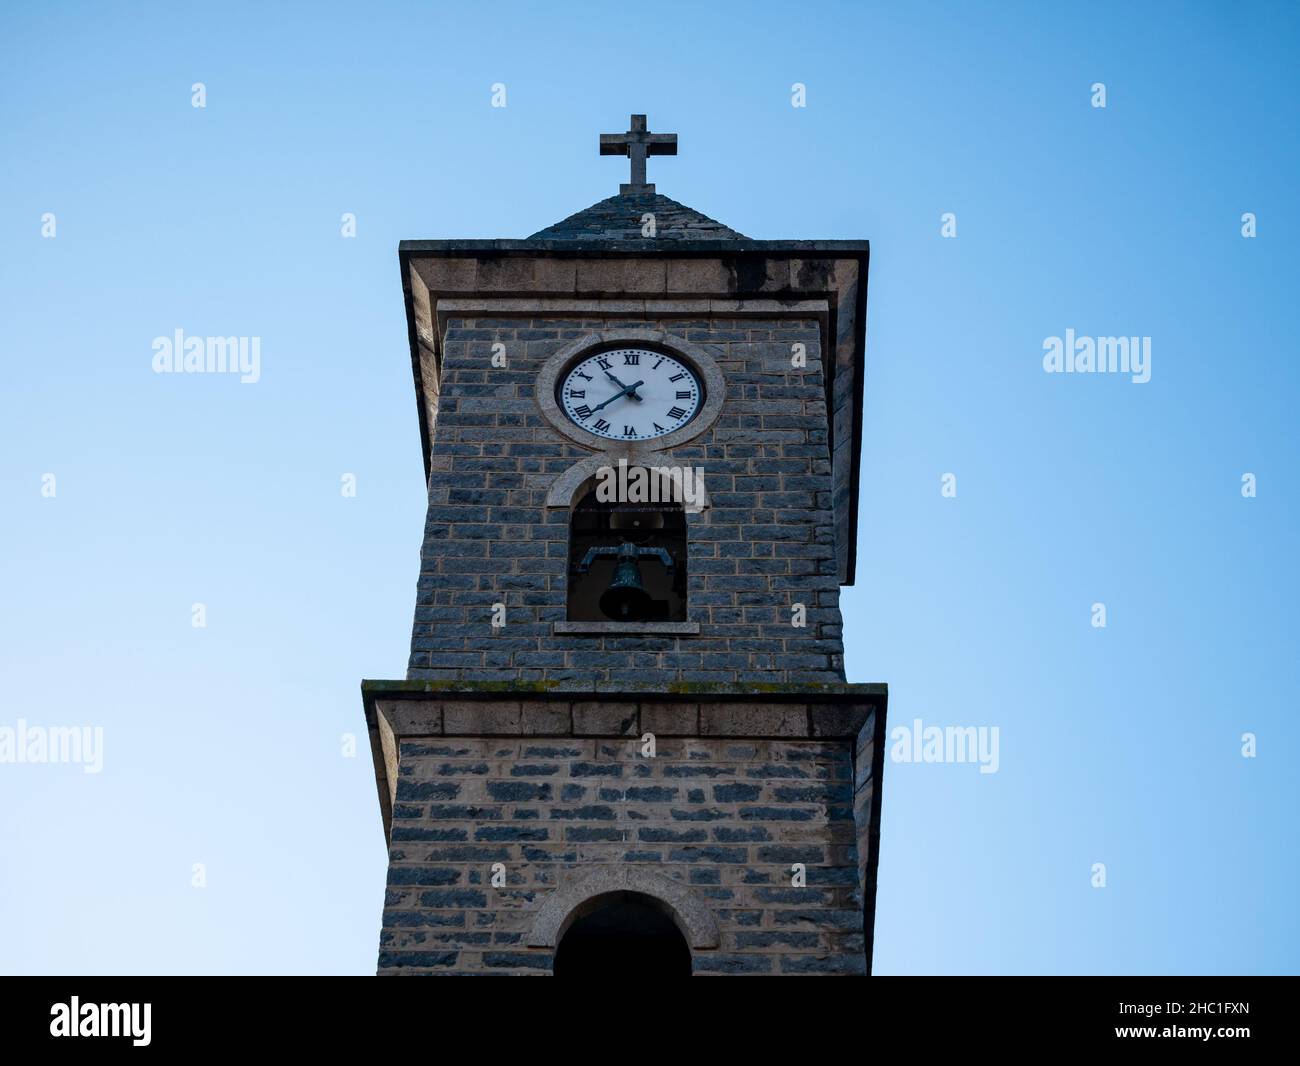 front view of the facade of a tower with bell tower and clock Stock Photo